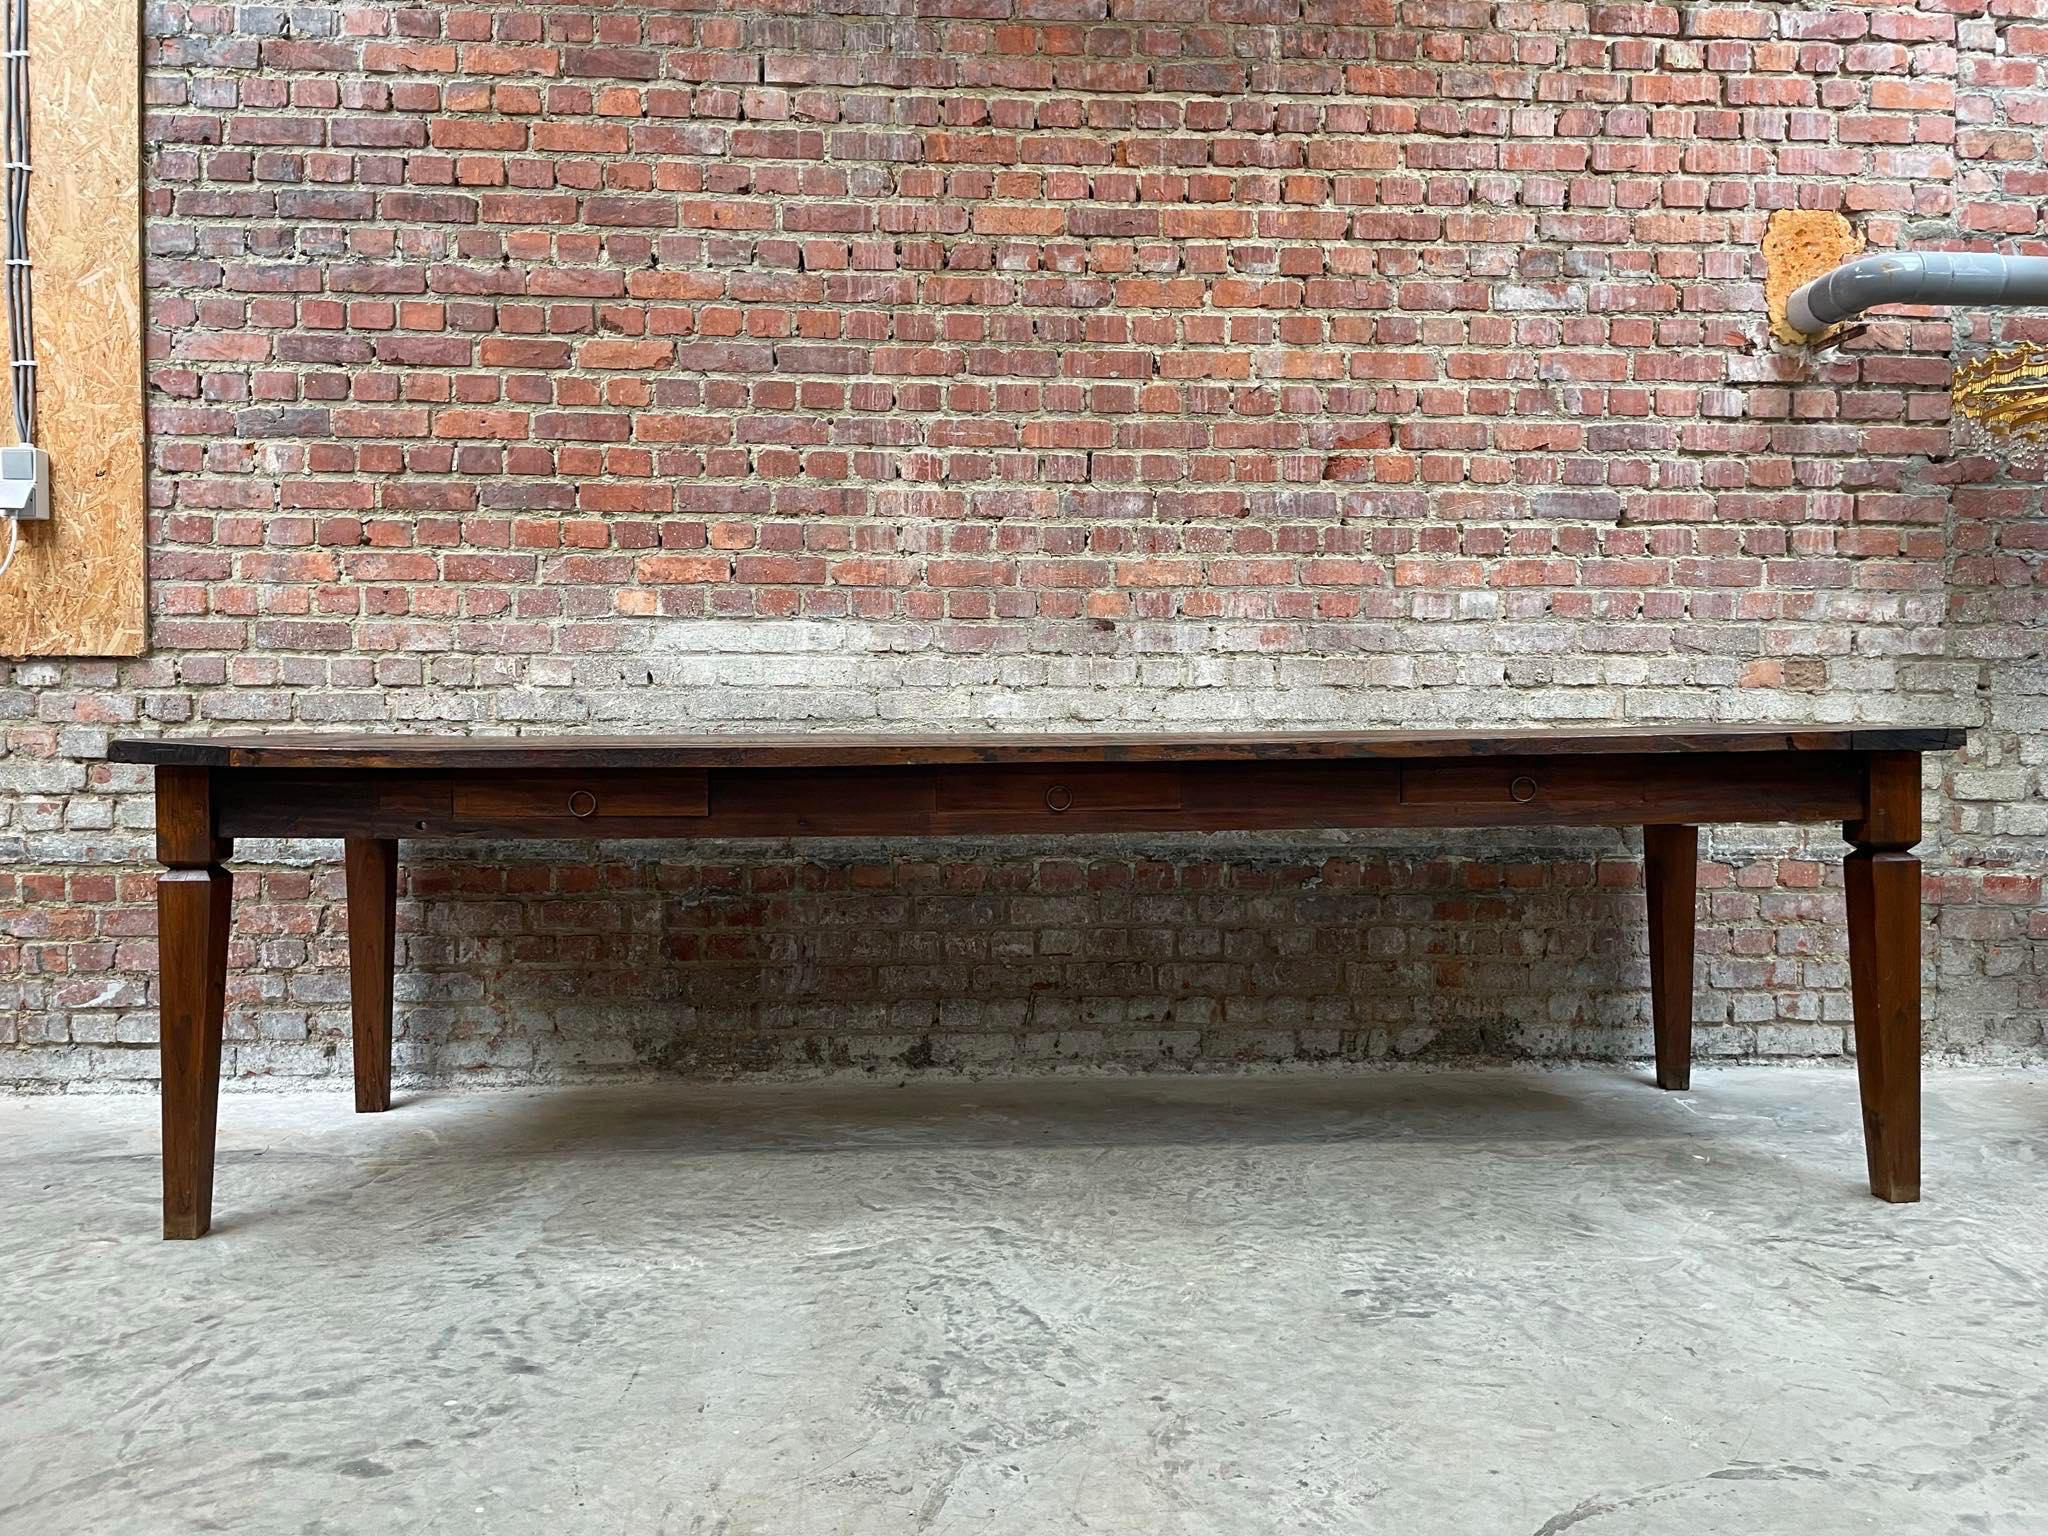 Beautiful old farm table with incredible patina! Seating 10-12 people.